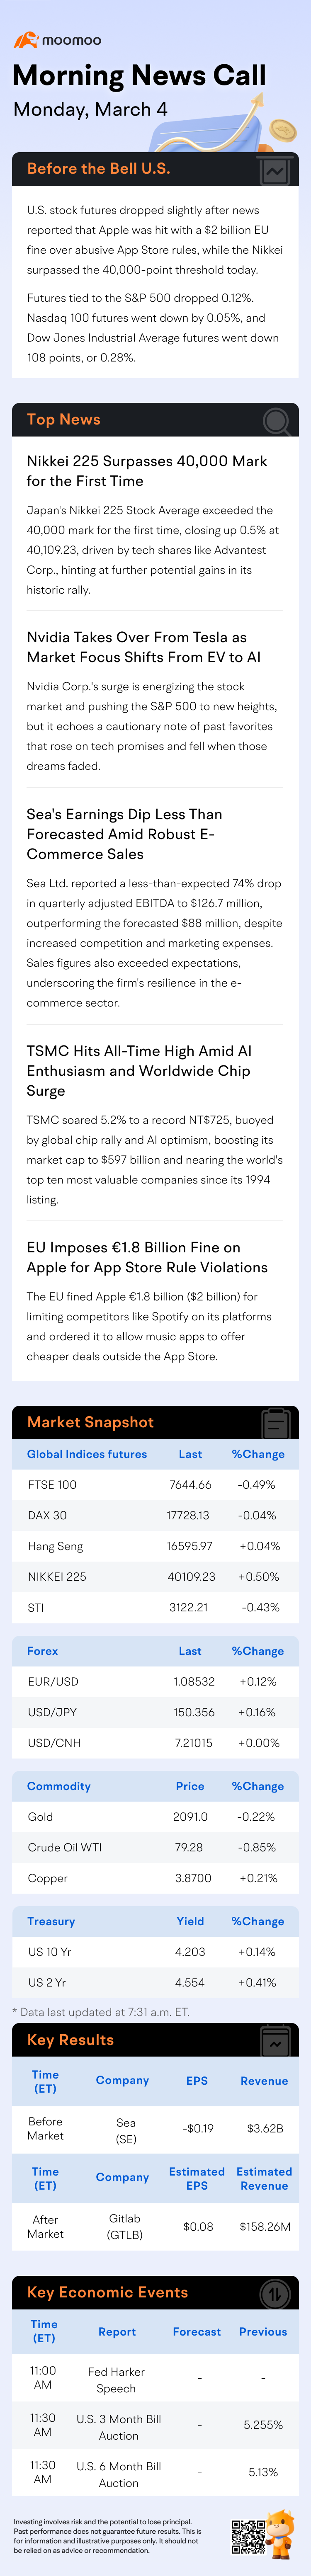 Morning News Call | Stock Futures Dropped Slightly After News Reported Apple's $2 Billion EU Fine